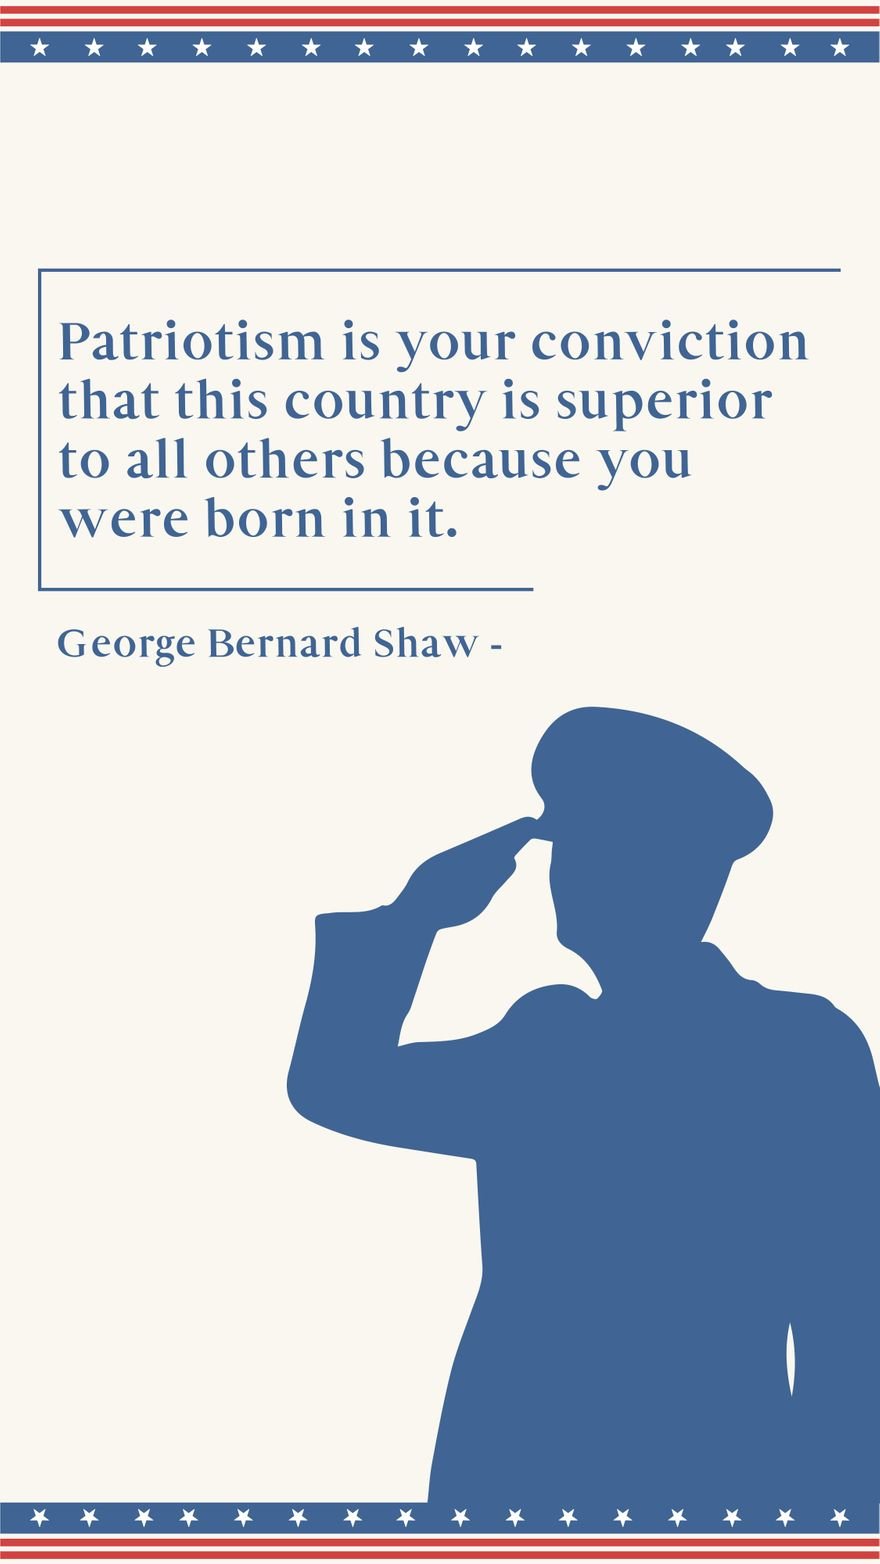 George Bernard Shaw - Patriotism is your conviction that this country is superior to all others because you were born in it.